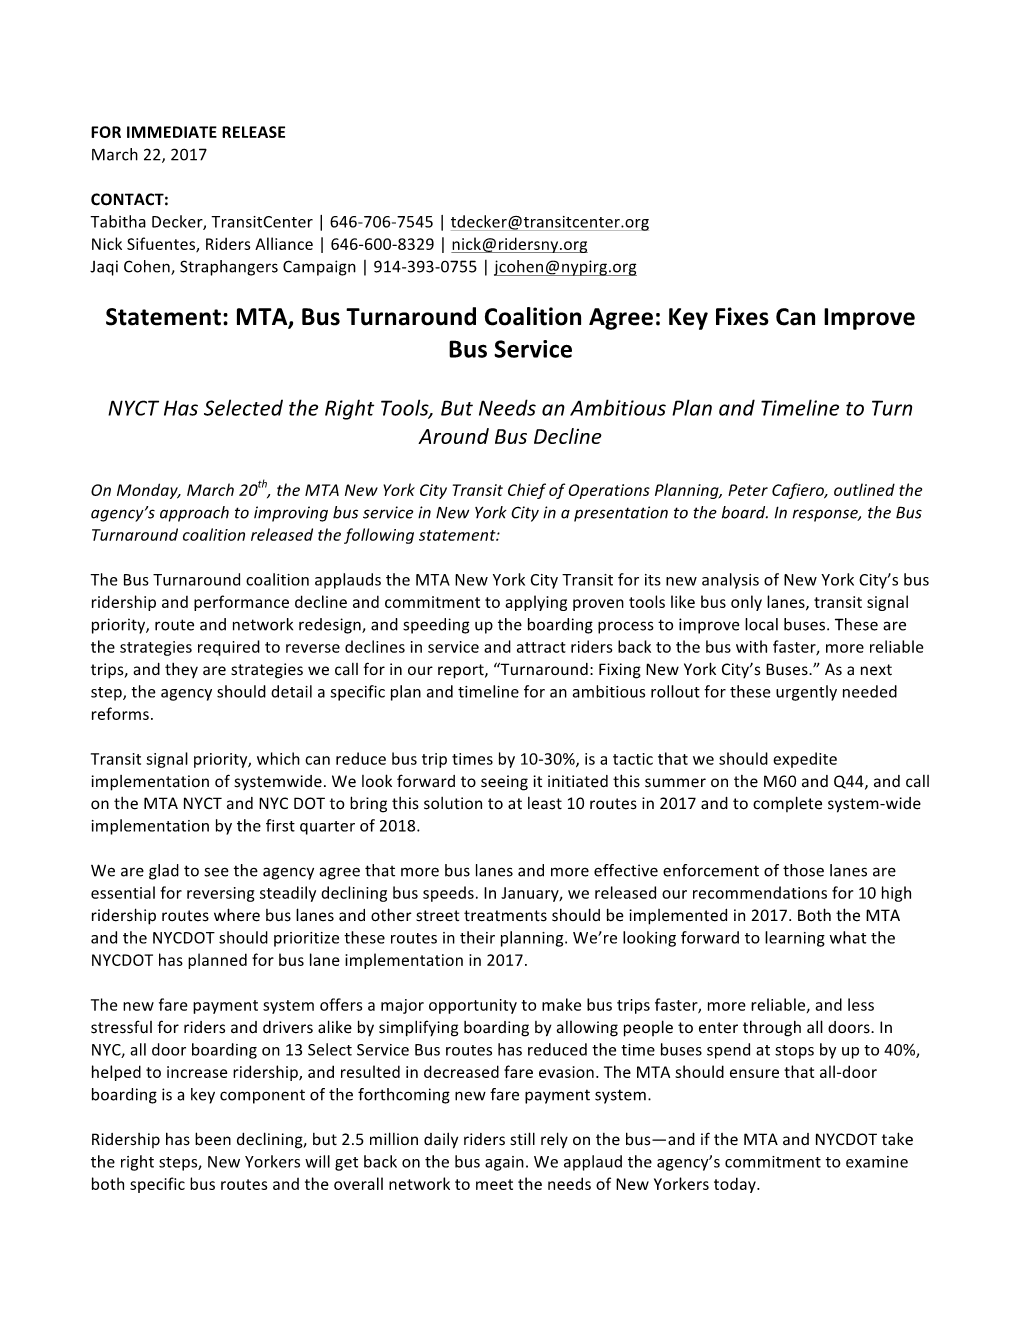 Statement: MTA, Bus Turnaround Coalition Agree: Key Fixes Can Improve Bus Service